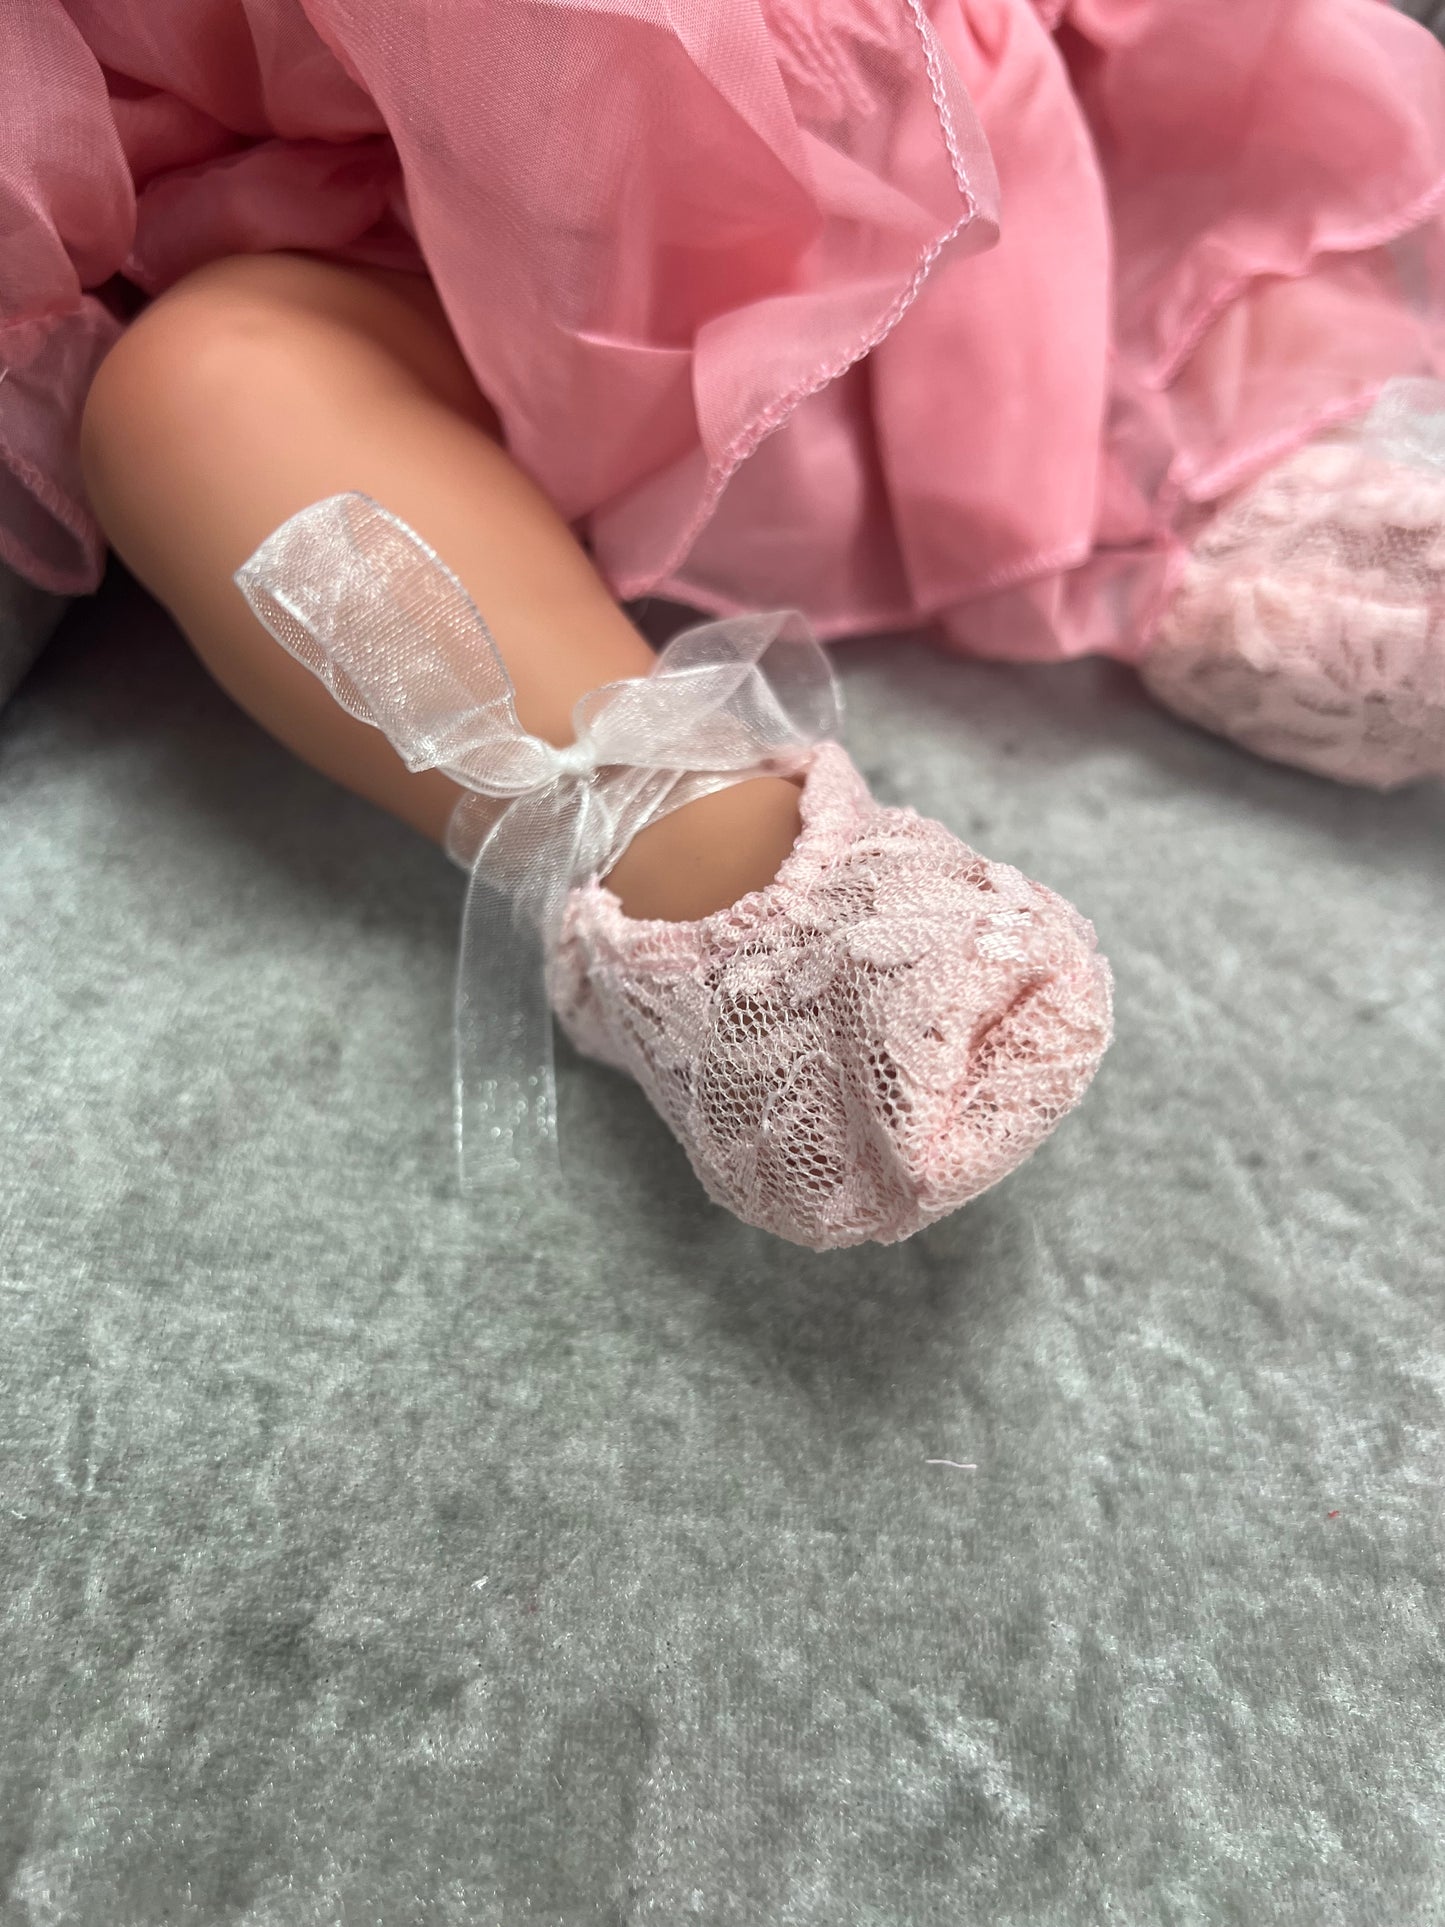 Pink Doll Frilly Dress Outfit & Pillow